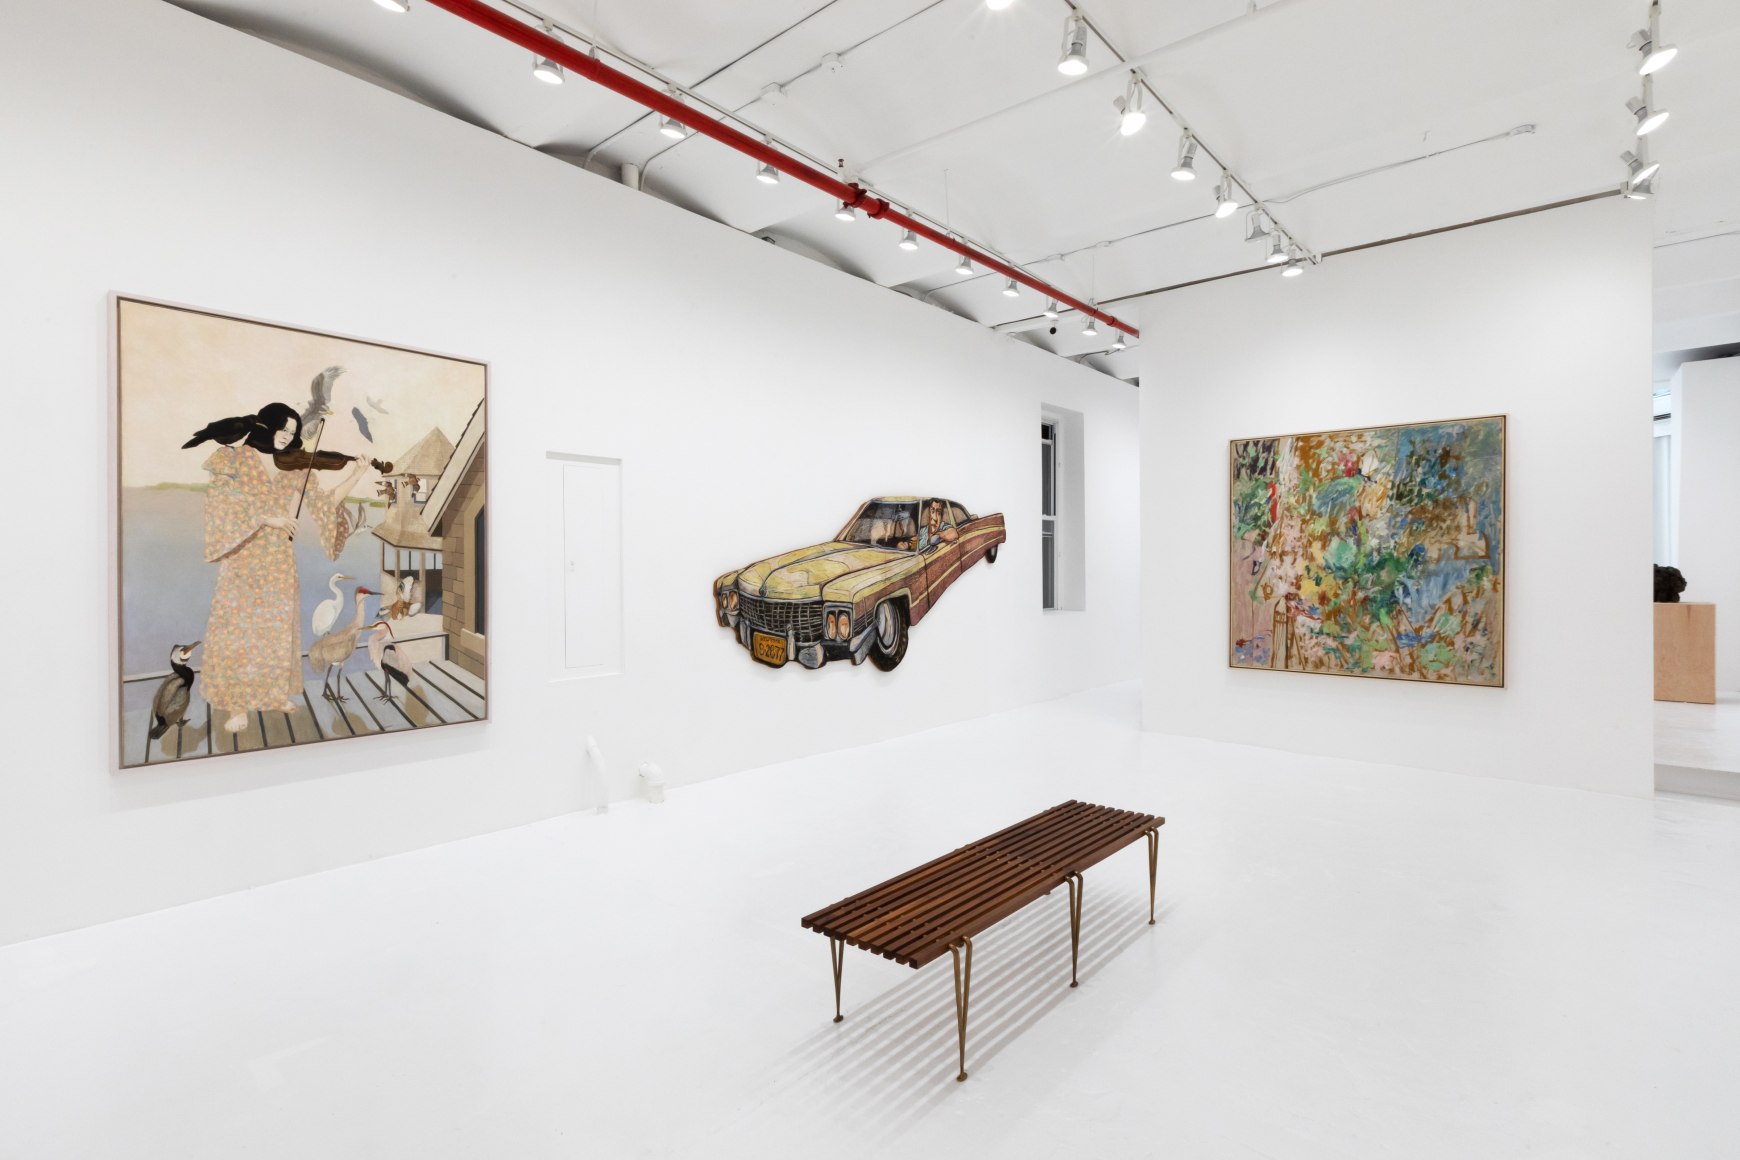 Art dealer Colby Larsen finds a balance with two galleries